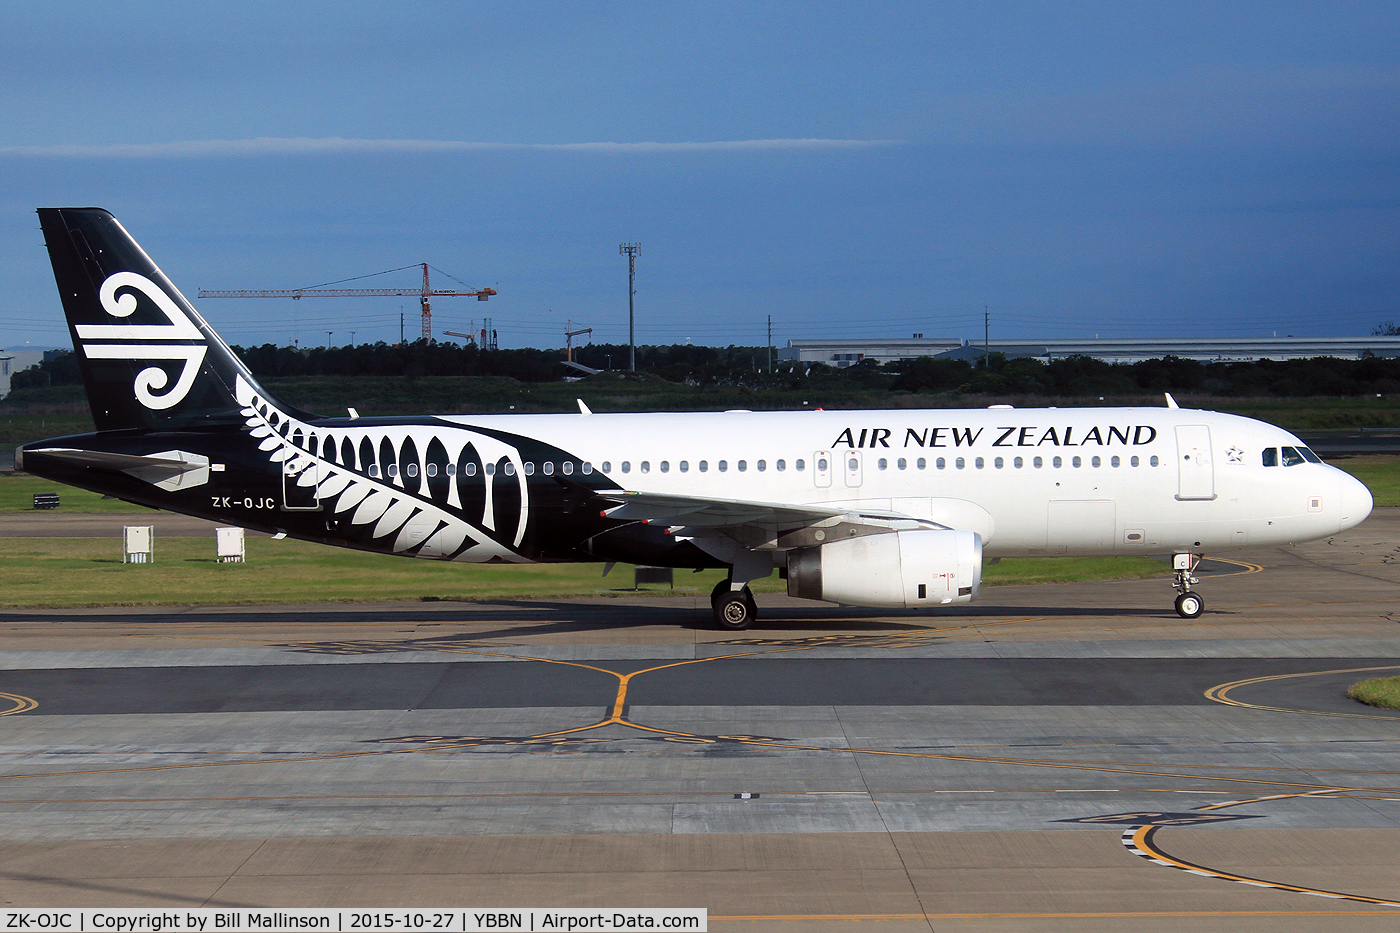 ZK-OJC, 2003 Airbus A320-232 C/N 2112, just in from AKL